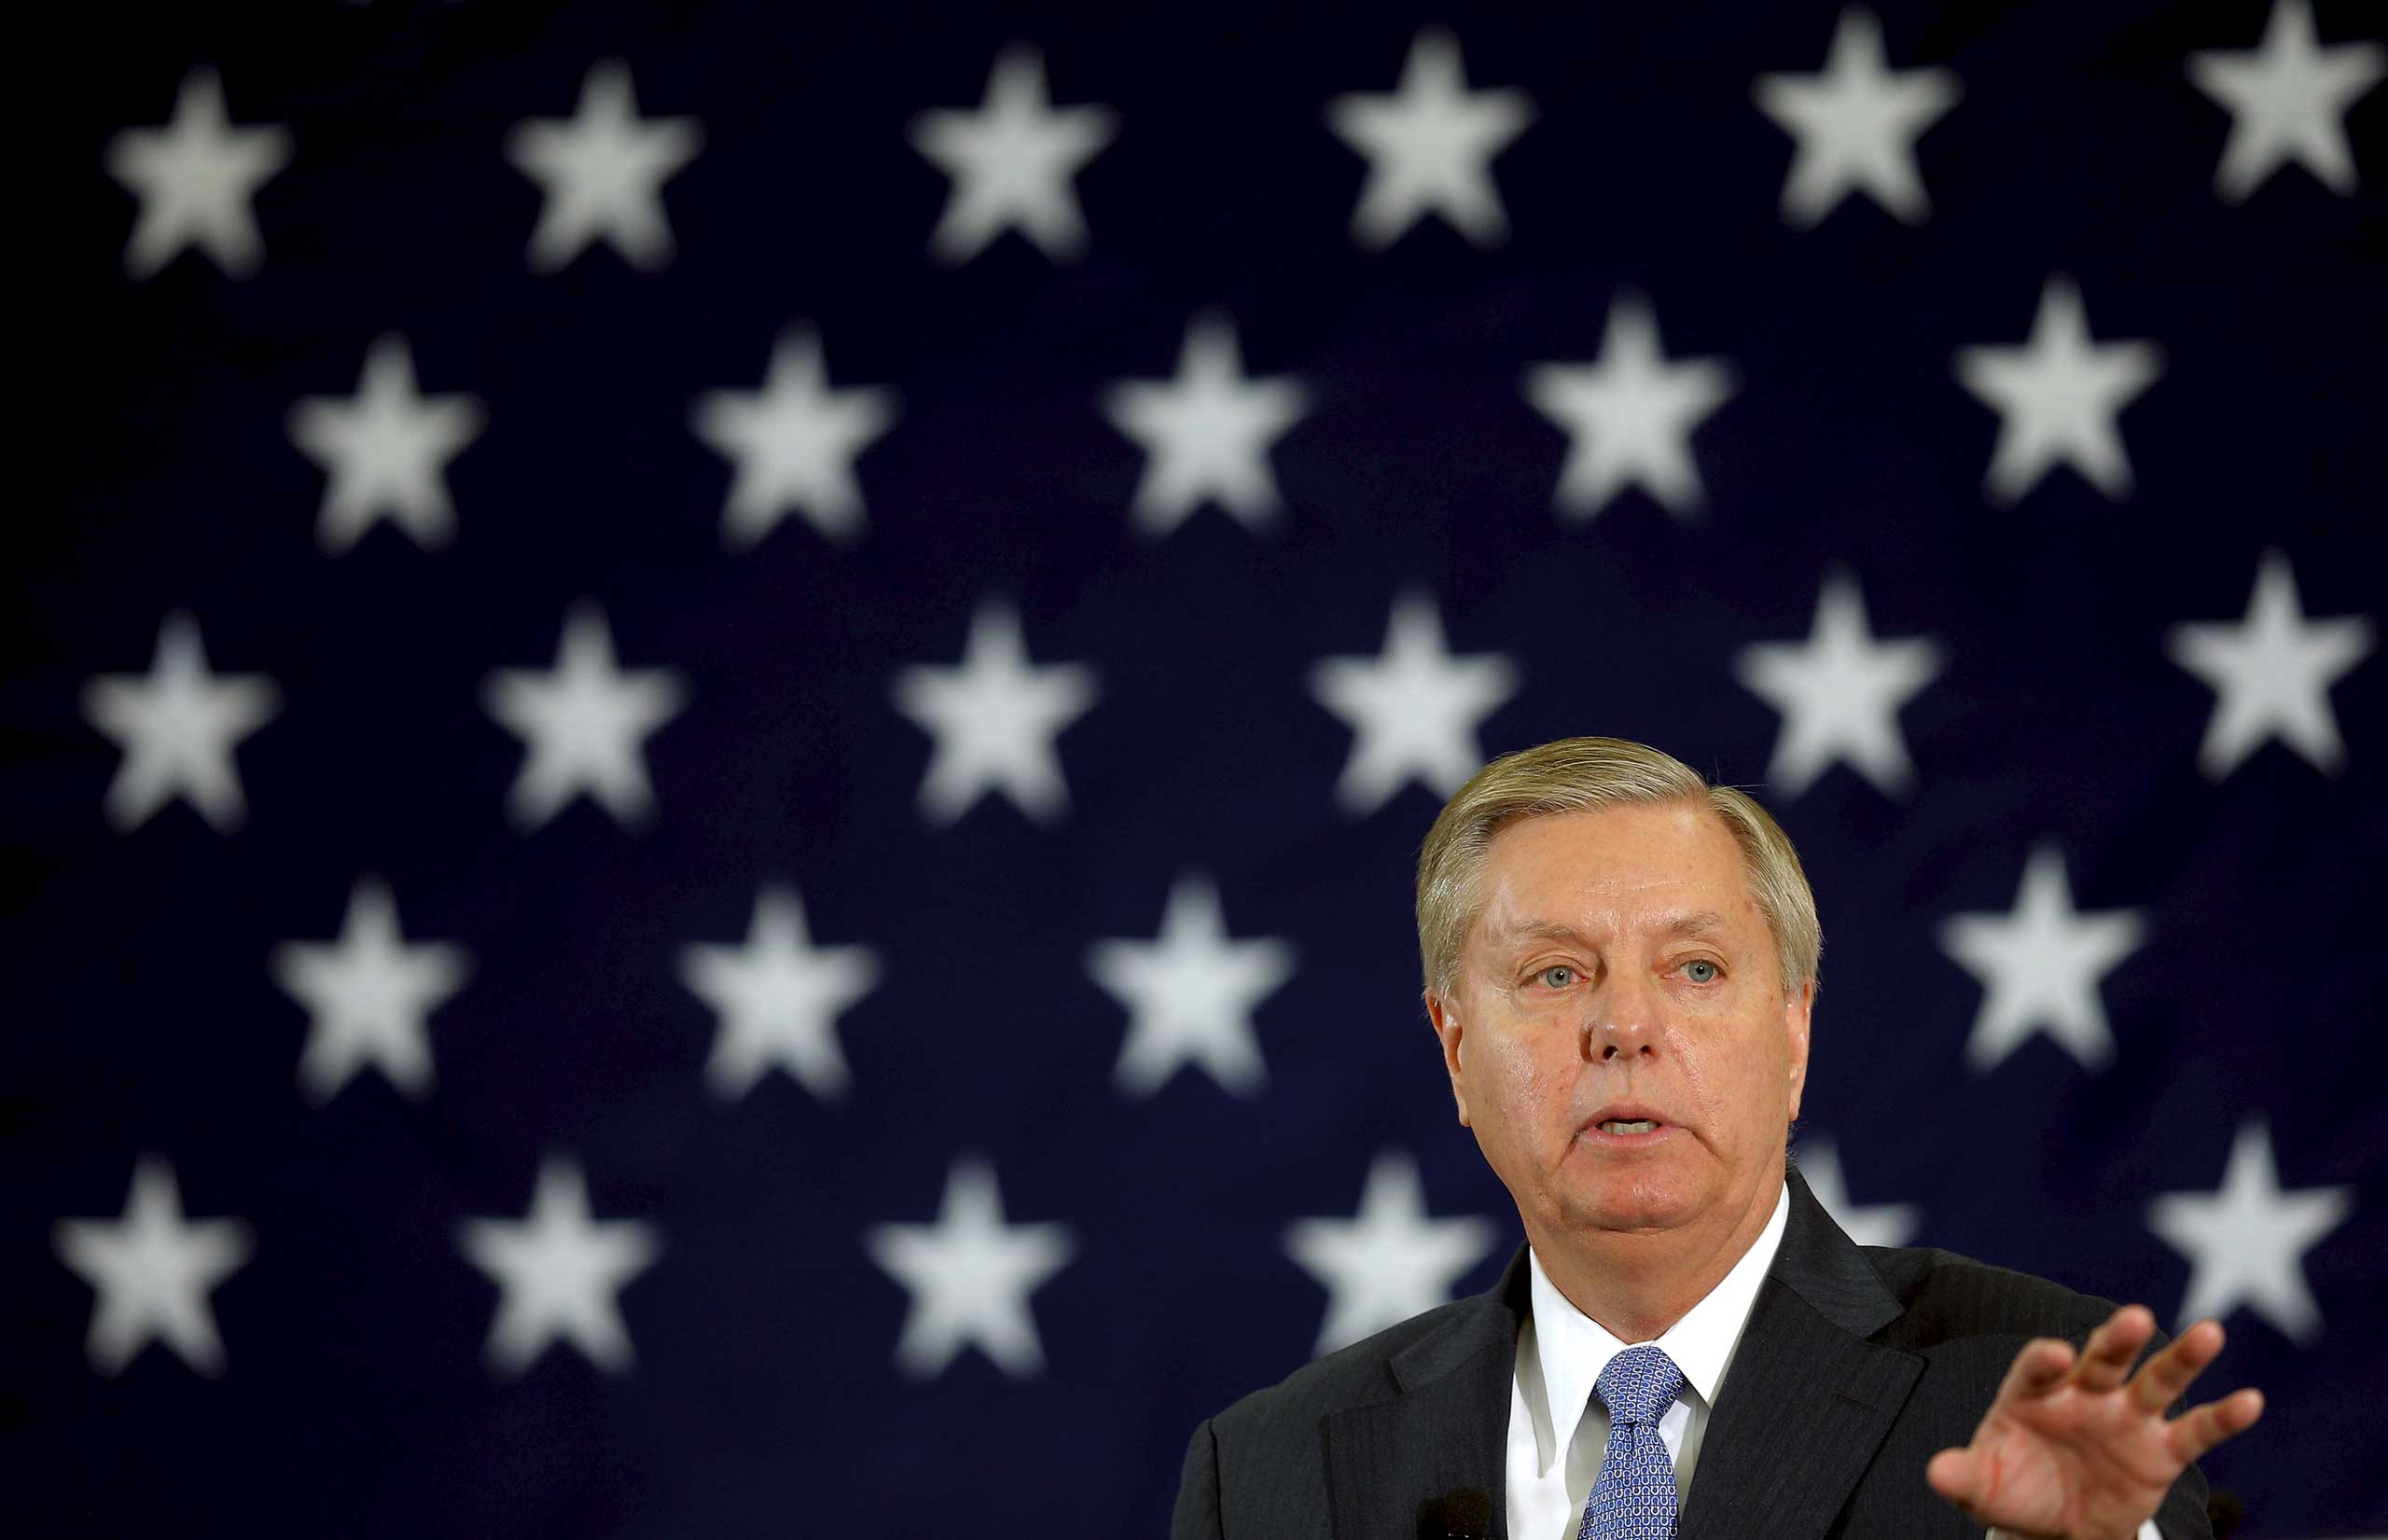 Potential Republican 2016 presidential candidate U.S. Senator Lindsey Graham (R-SC) speaks at the First in the Nation Republican Leadership Conference in Nashua, New Hampshire, April 18, 2015.